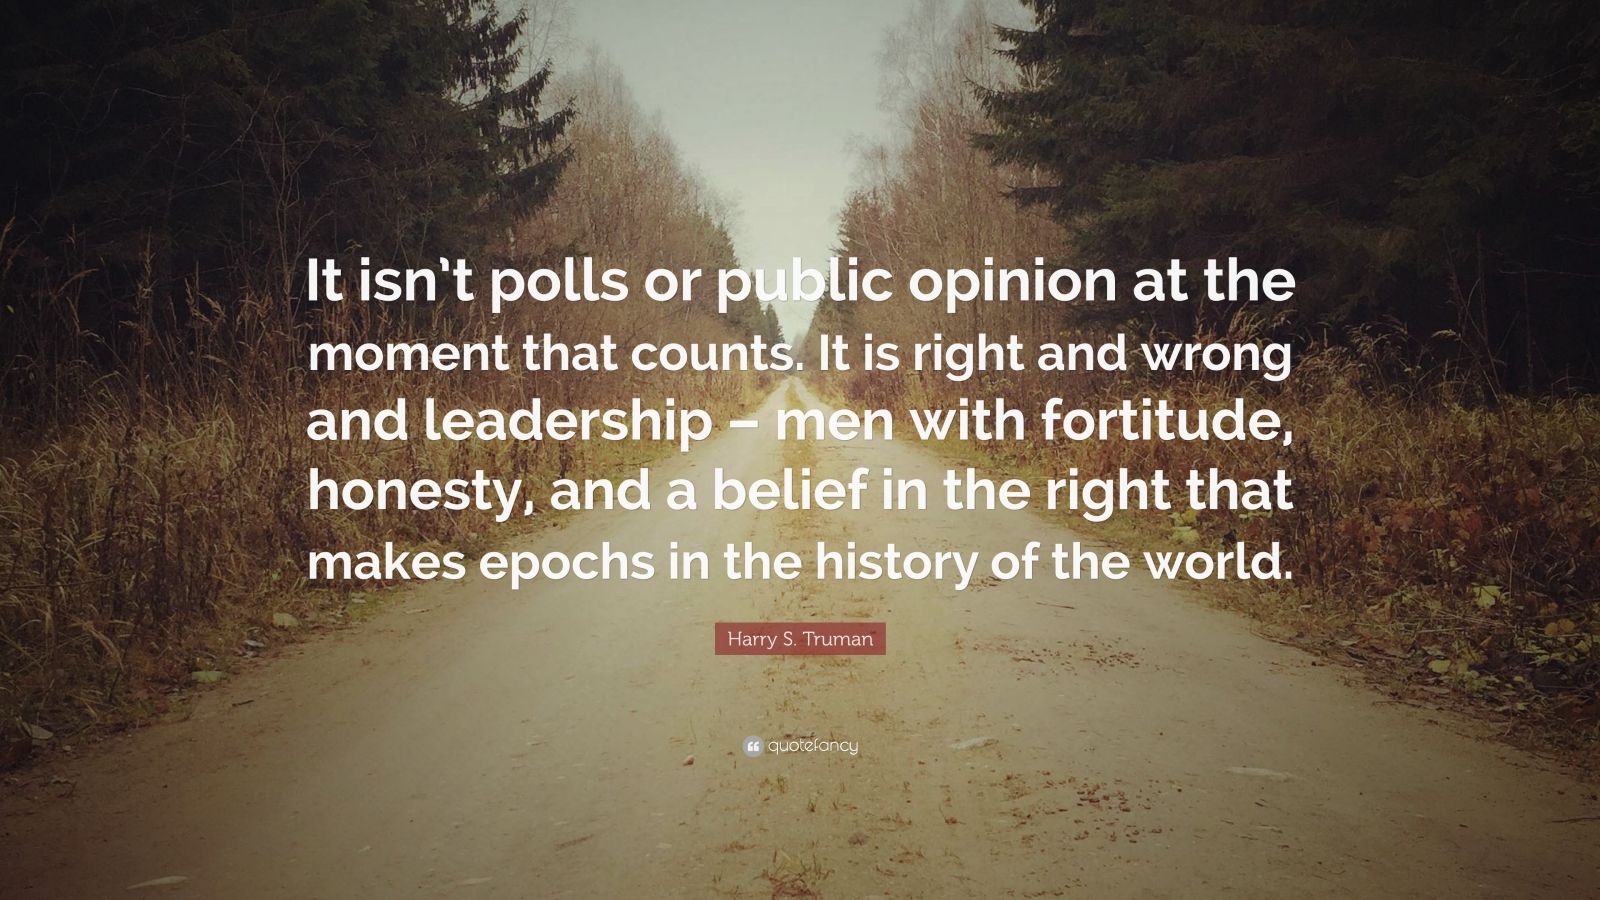 Harry S. Truman Quote: “It isn’t polls or public opinion at the moment ...